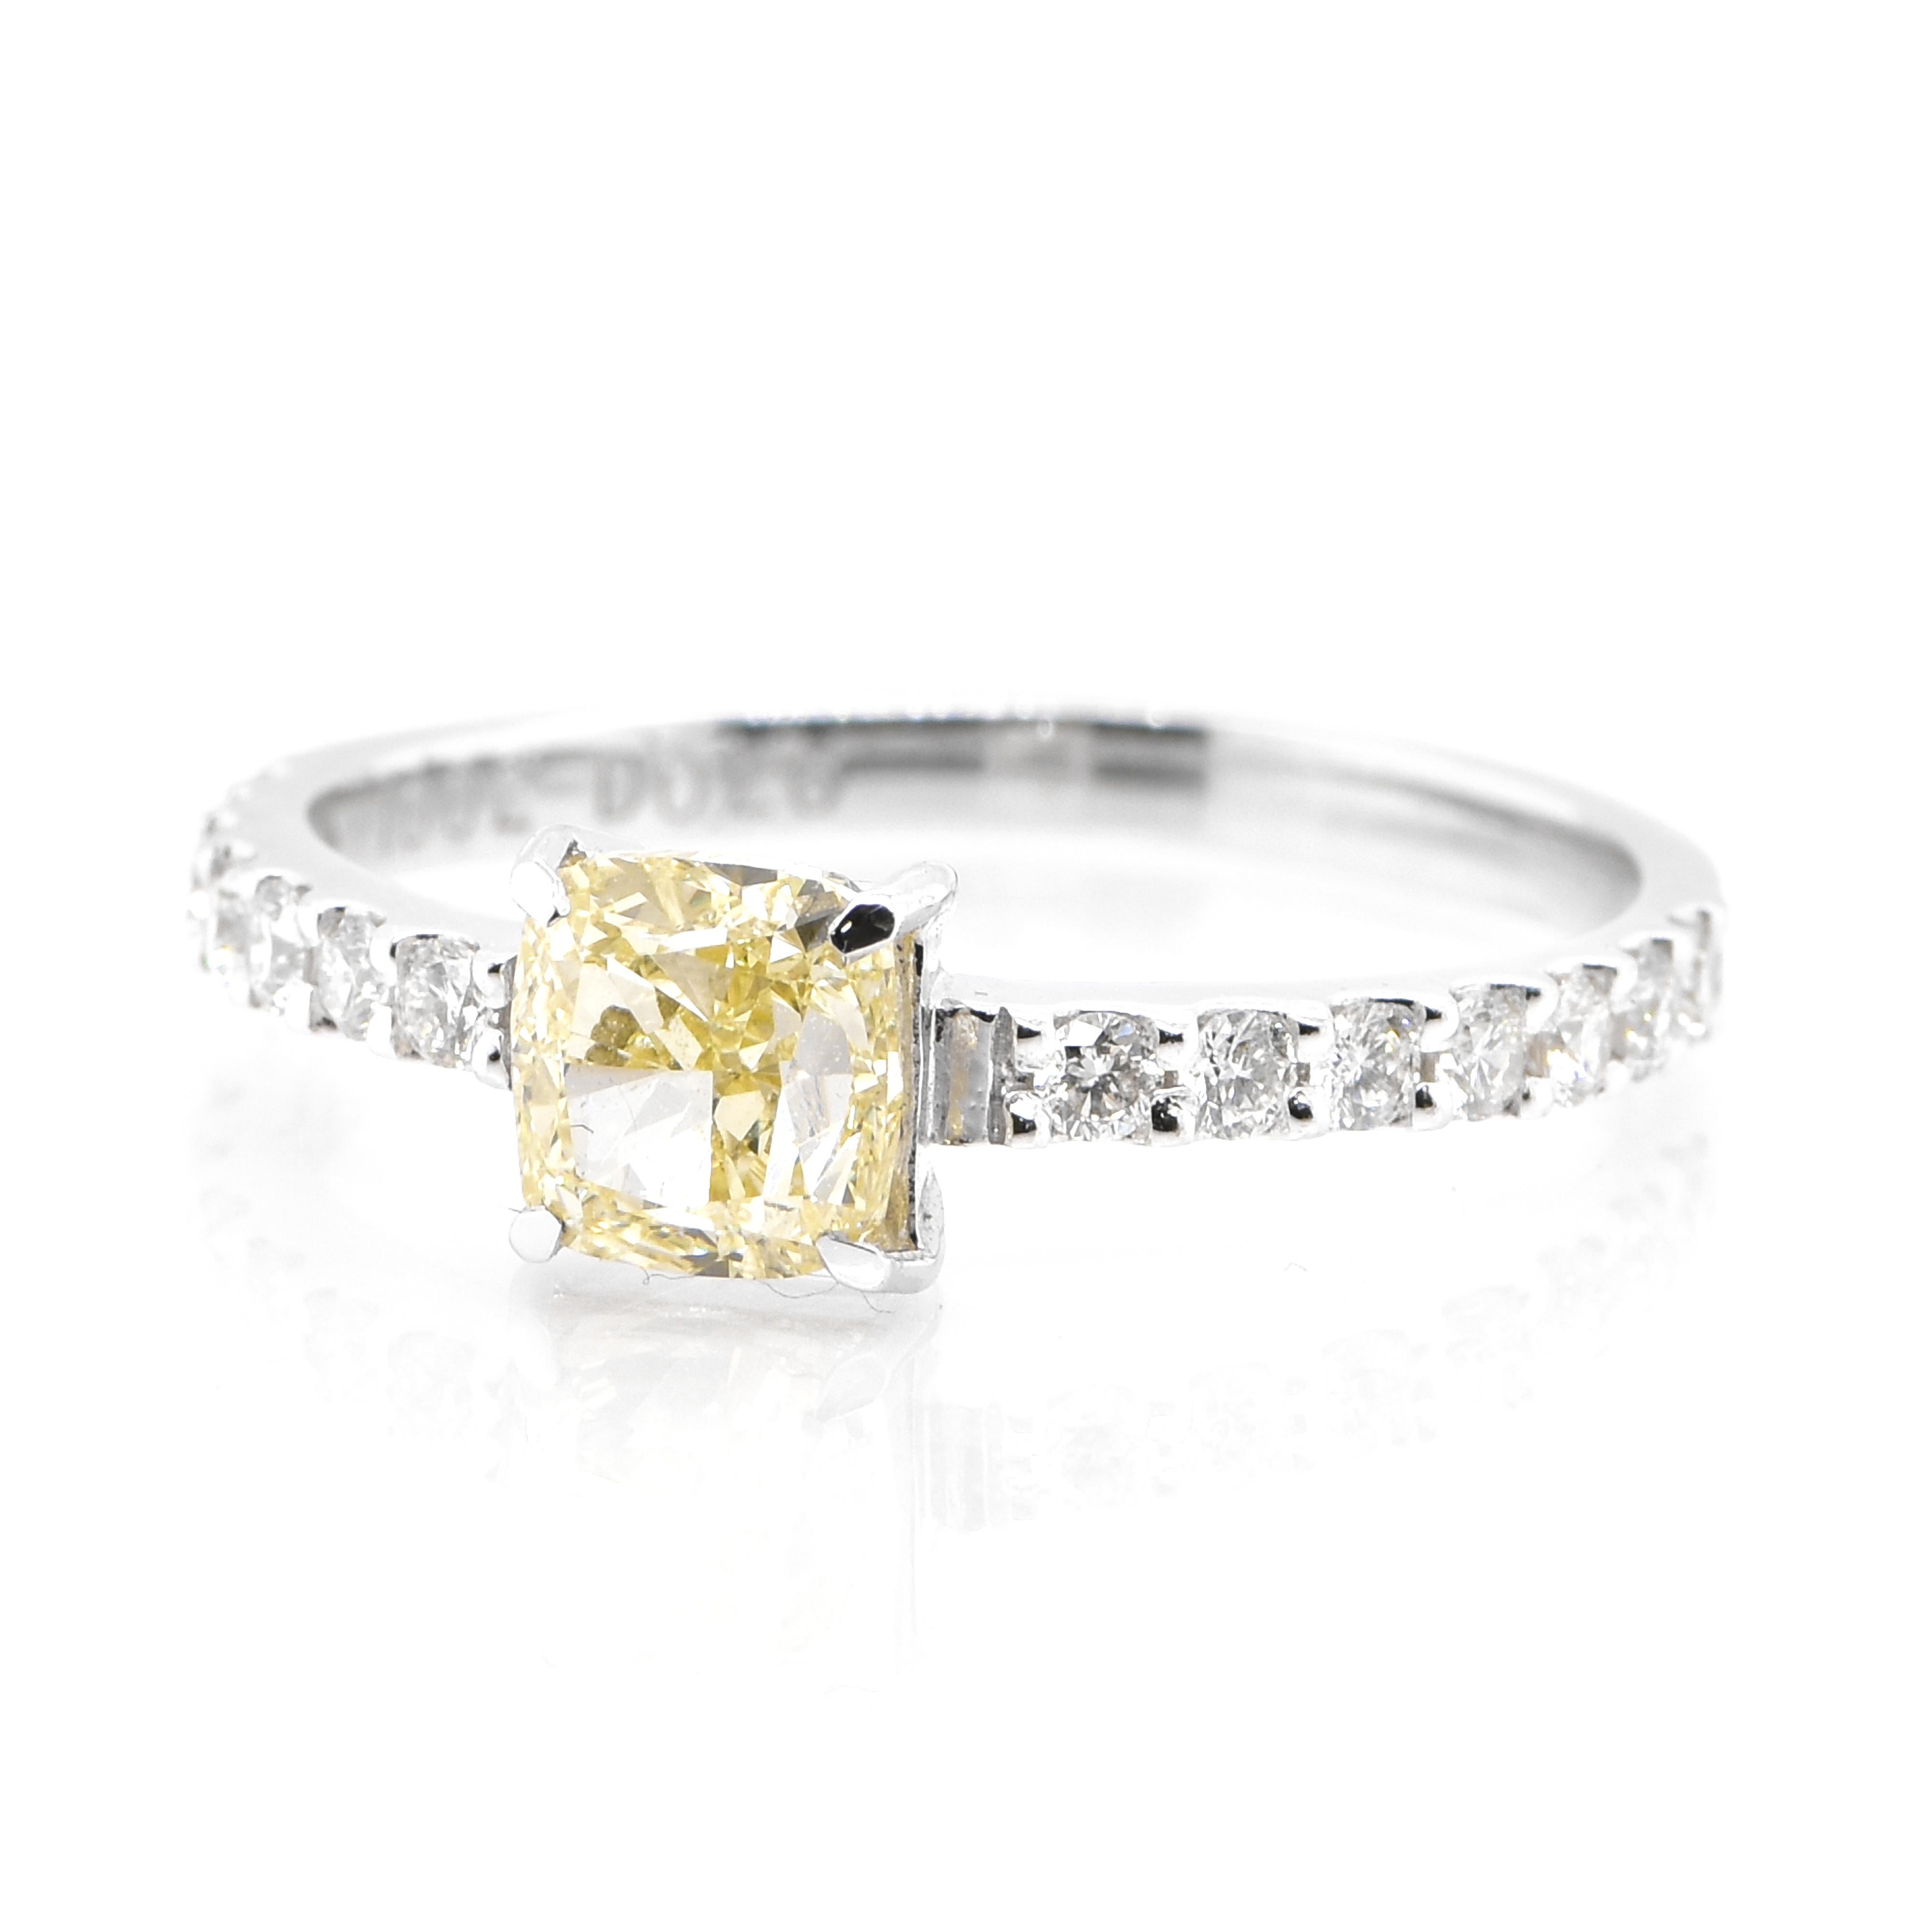 A beautiful ring featuring a CGL Certified 1.002 Carat Natural VS-1, Light Yellow Diamond and 0.26 Carat Diamond accents set in Platinum. Diamonds have been adorned and cherished throughout human history and date back to thousands of years. They are